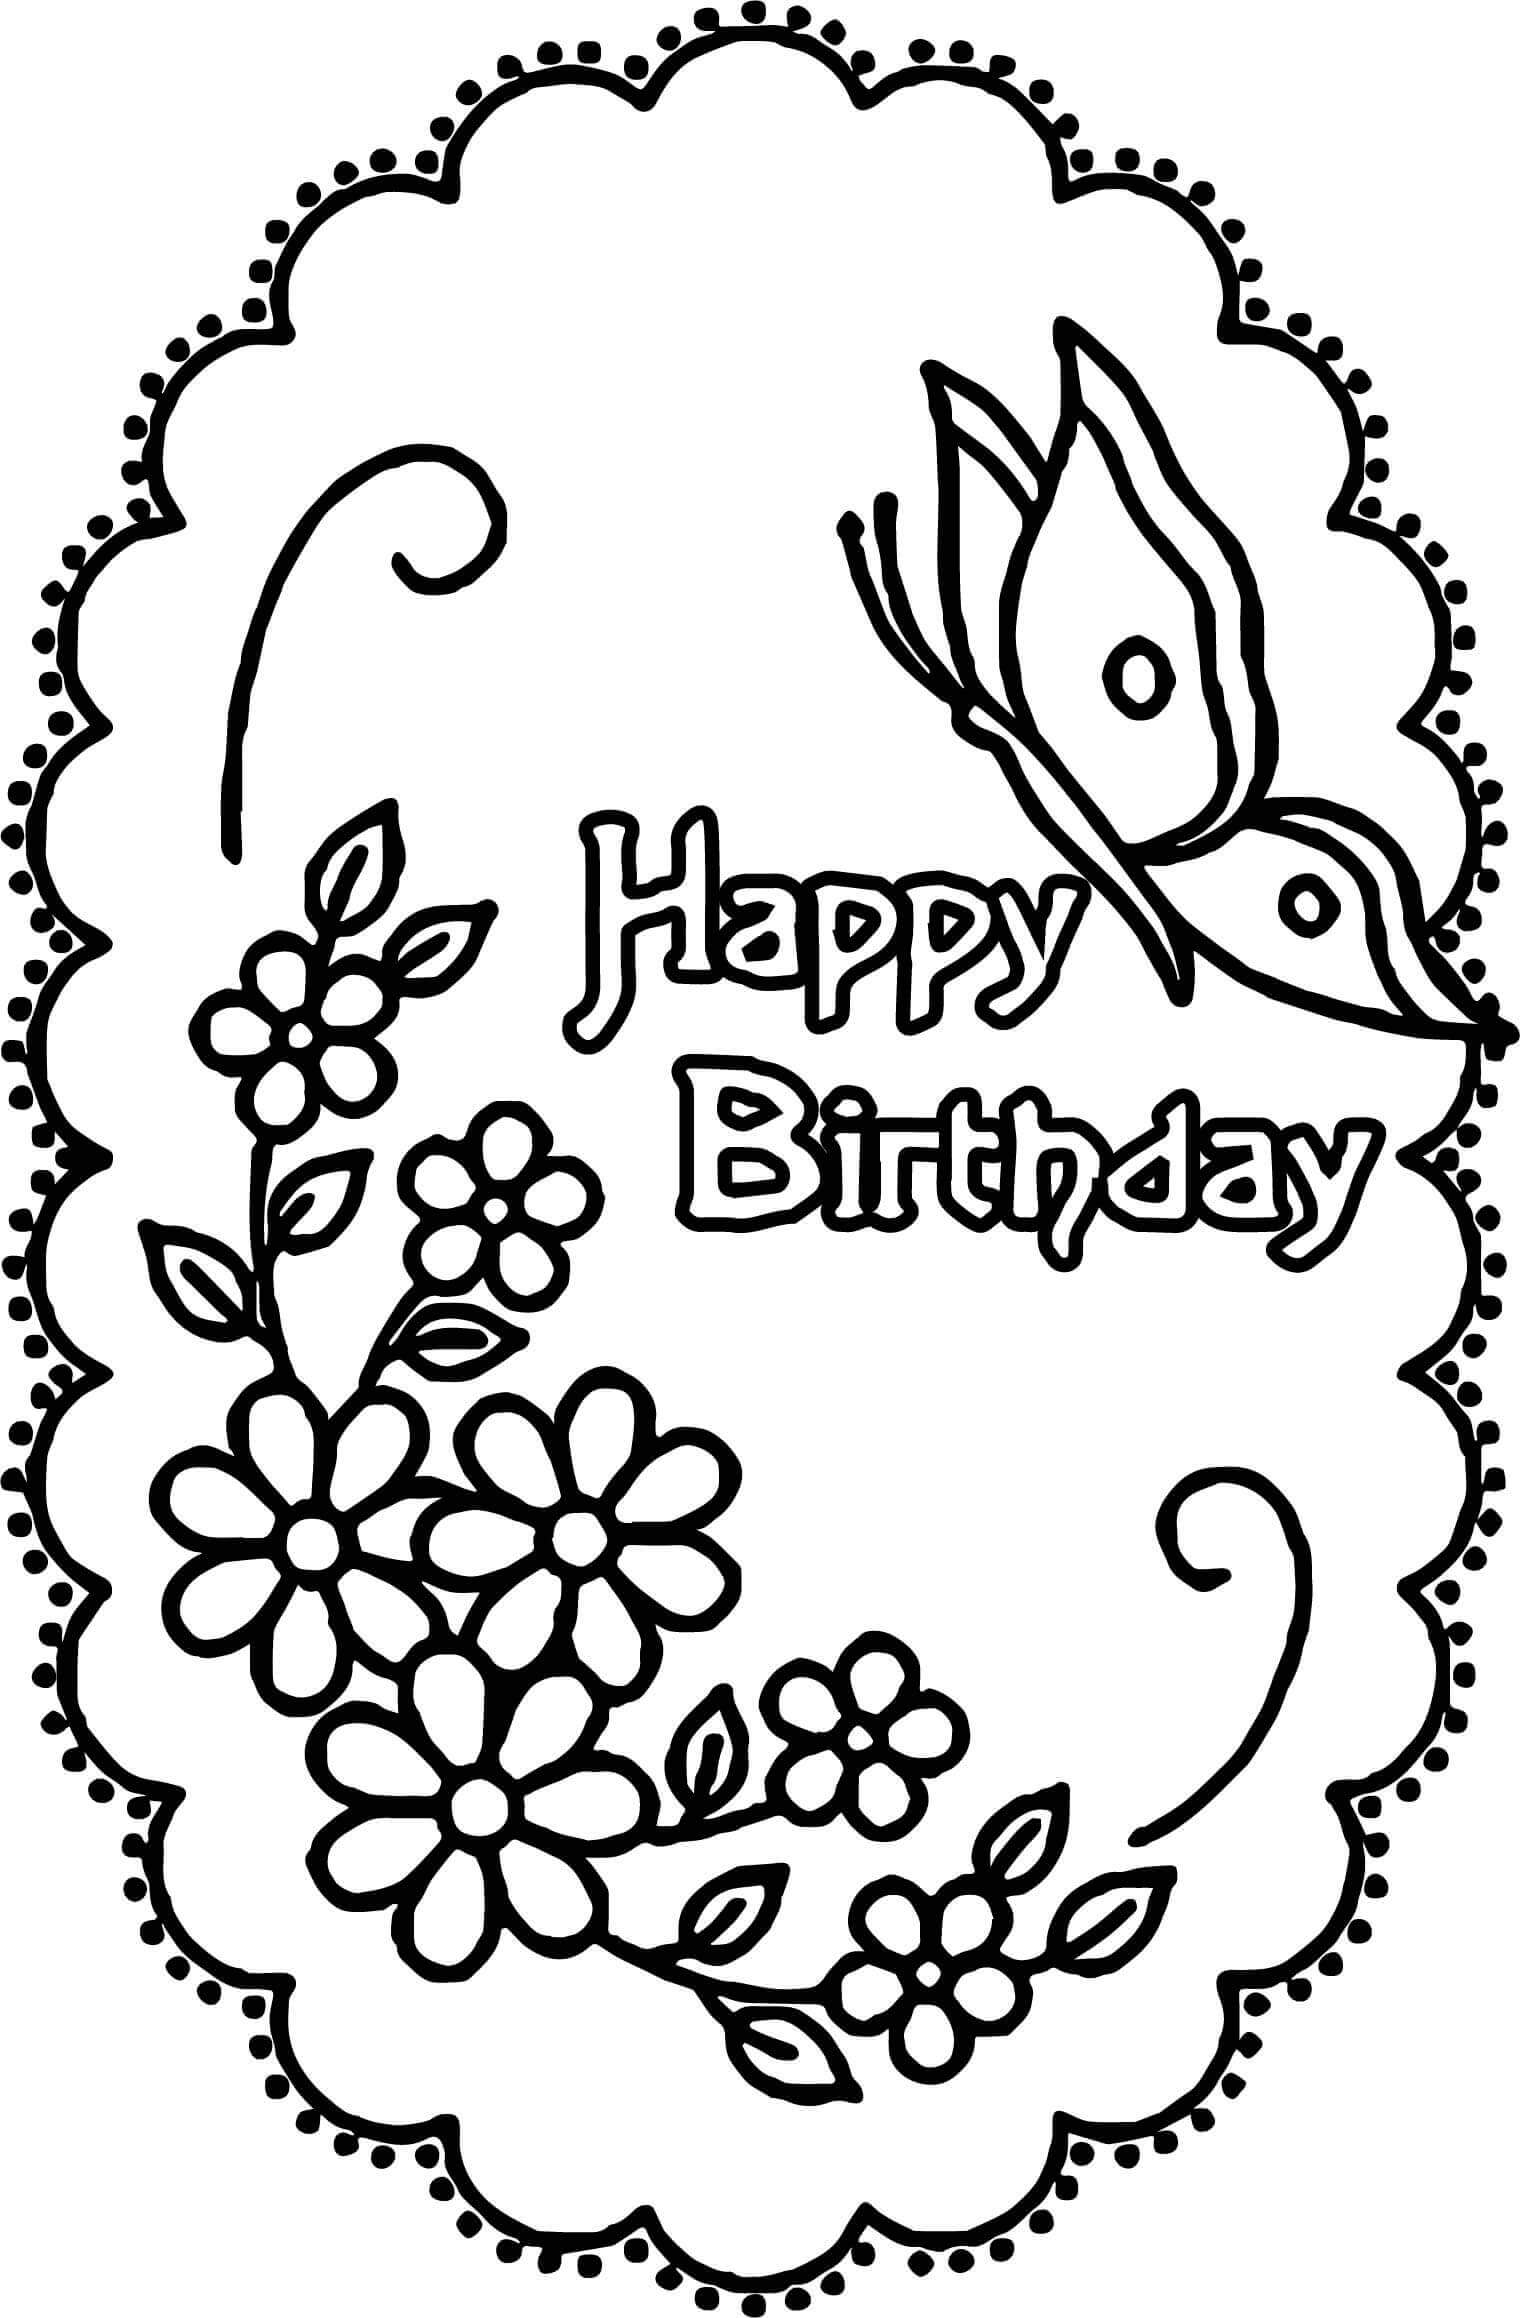 Happy Birthday Coloring Pages Coloring rocks 